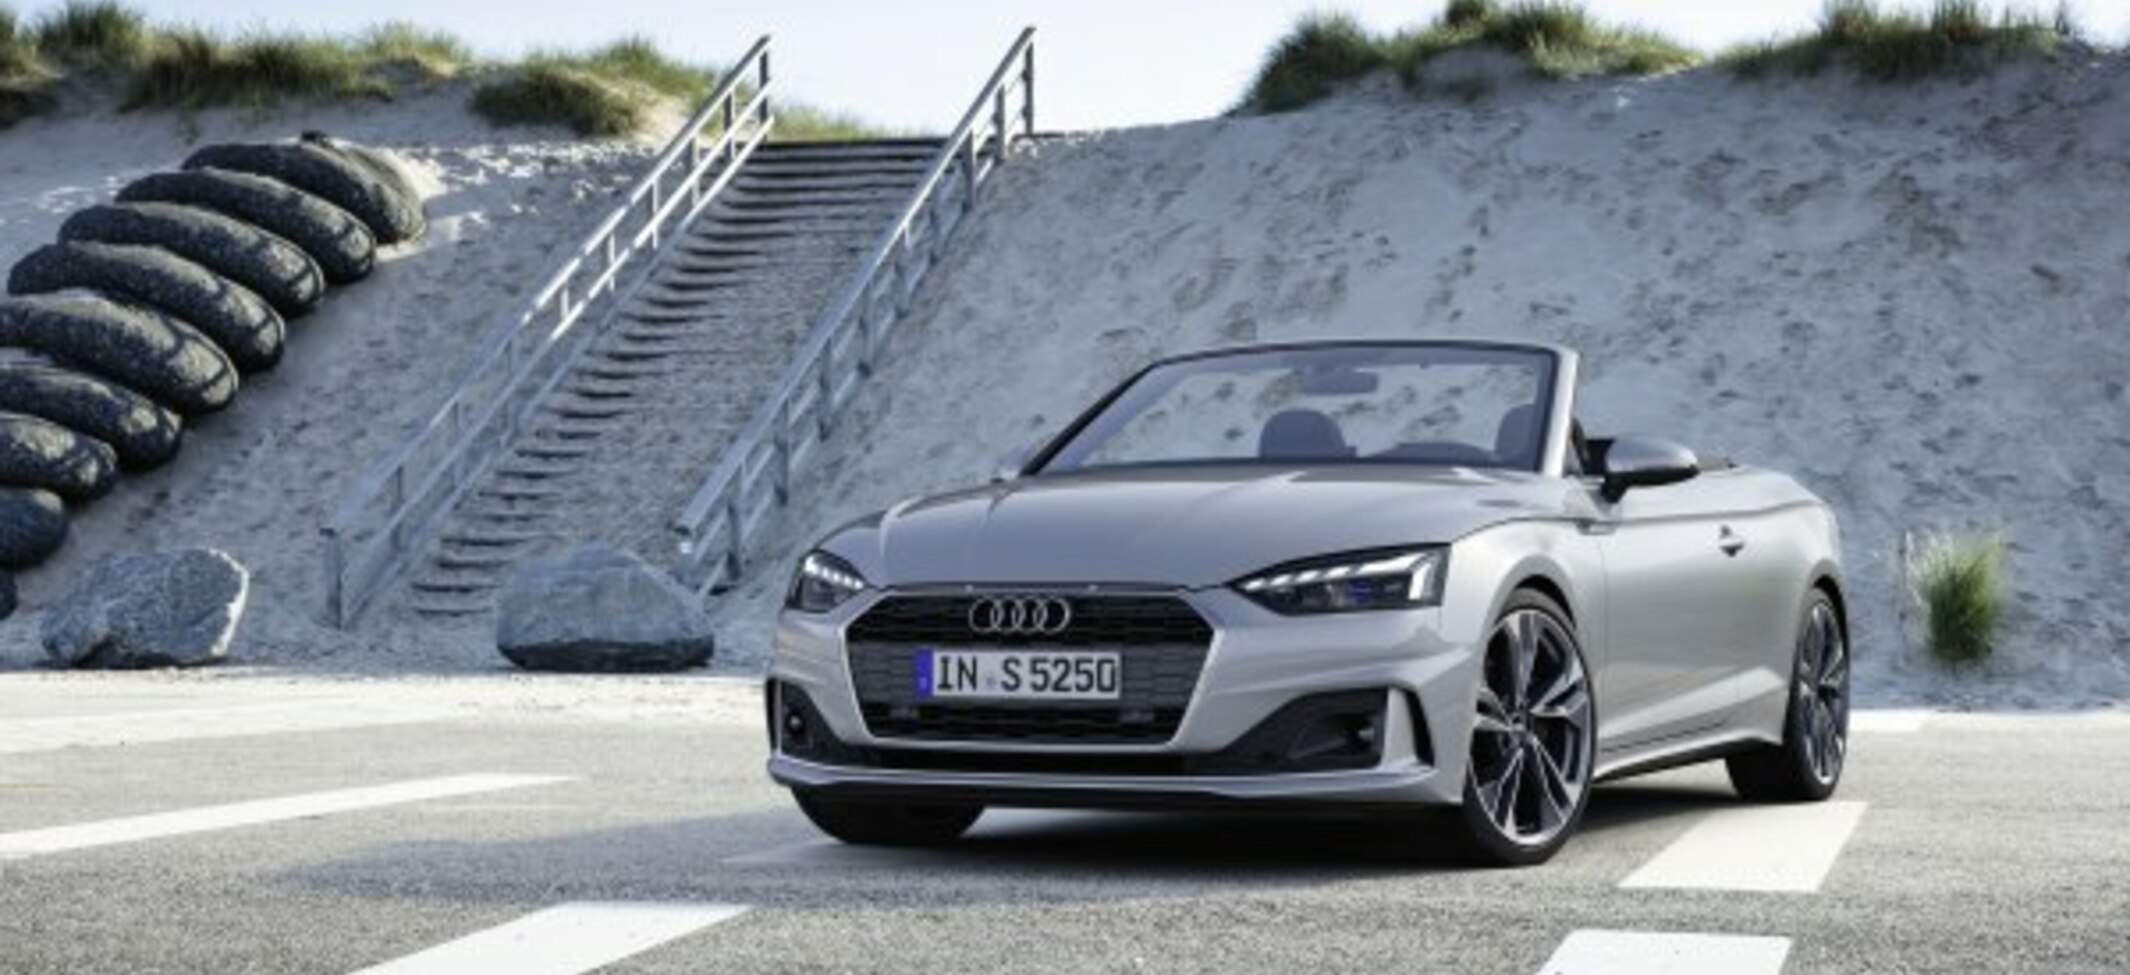 Audi A5 Cabriolet (F5, facelift 2019) 45 TFSI (245 Hp) quattro ultra S tronic 2019, 2020